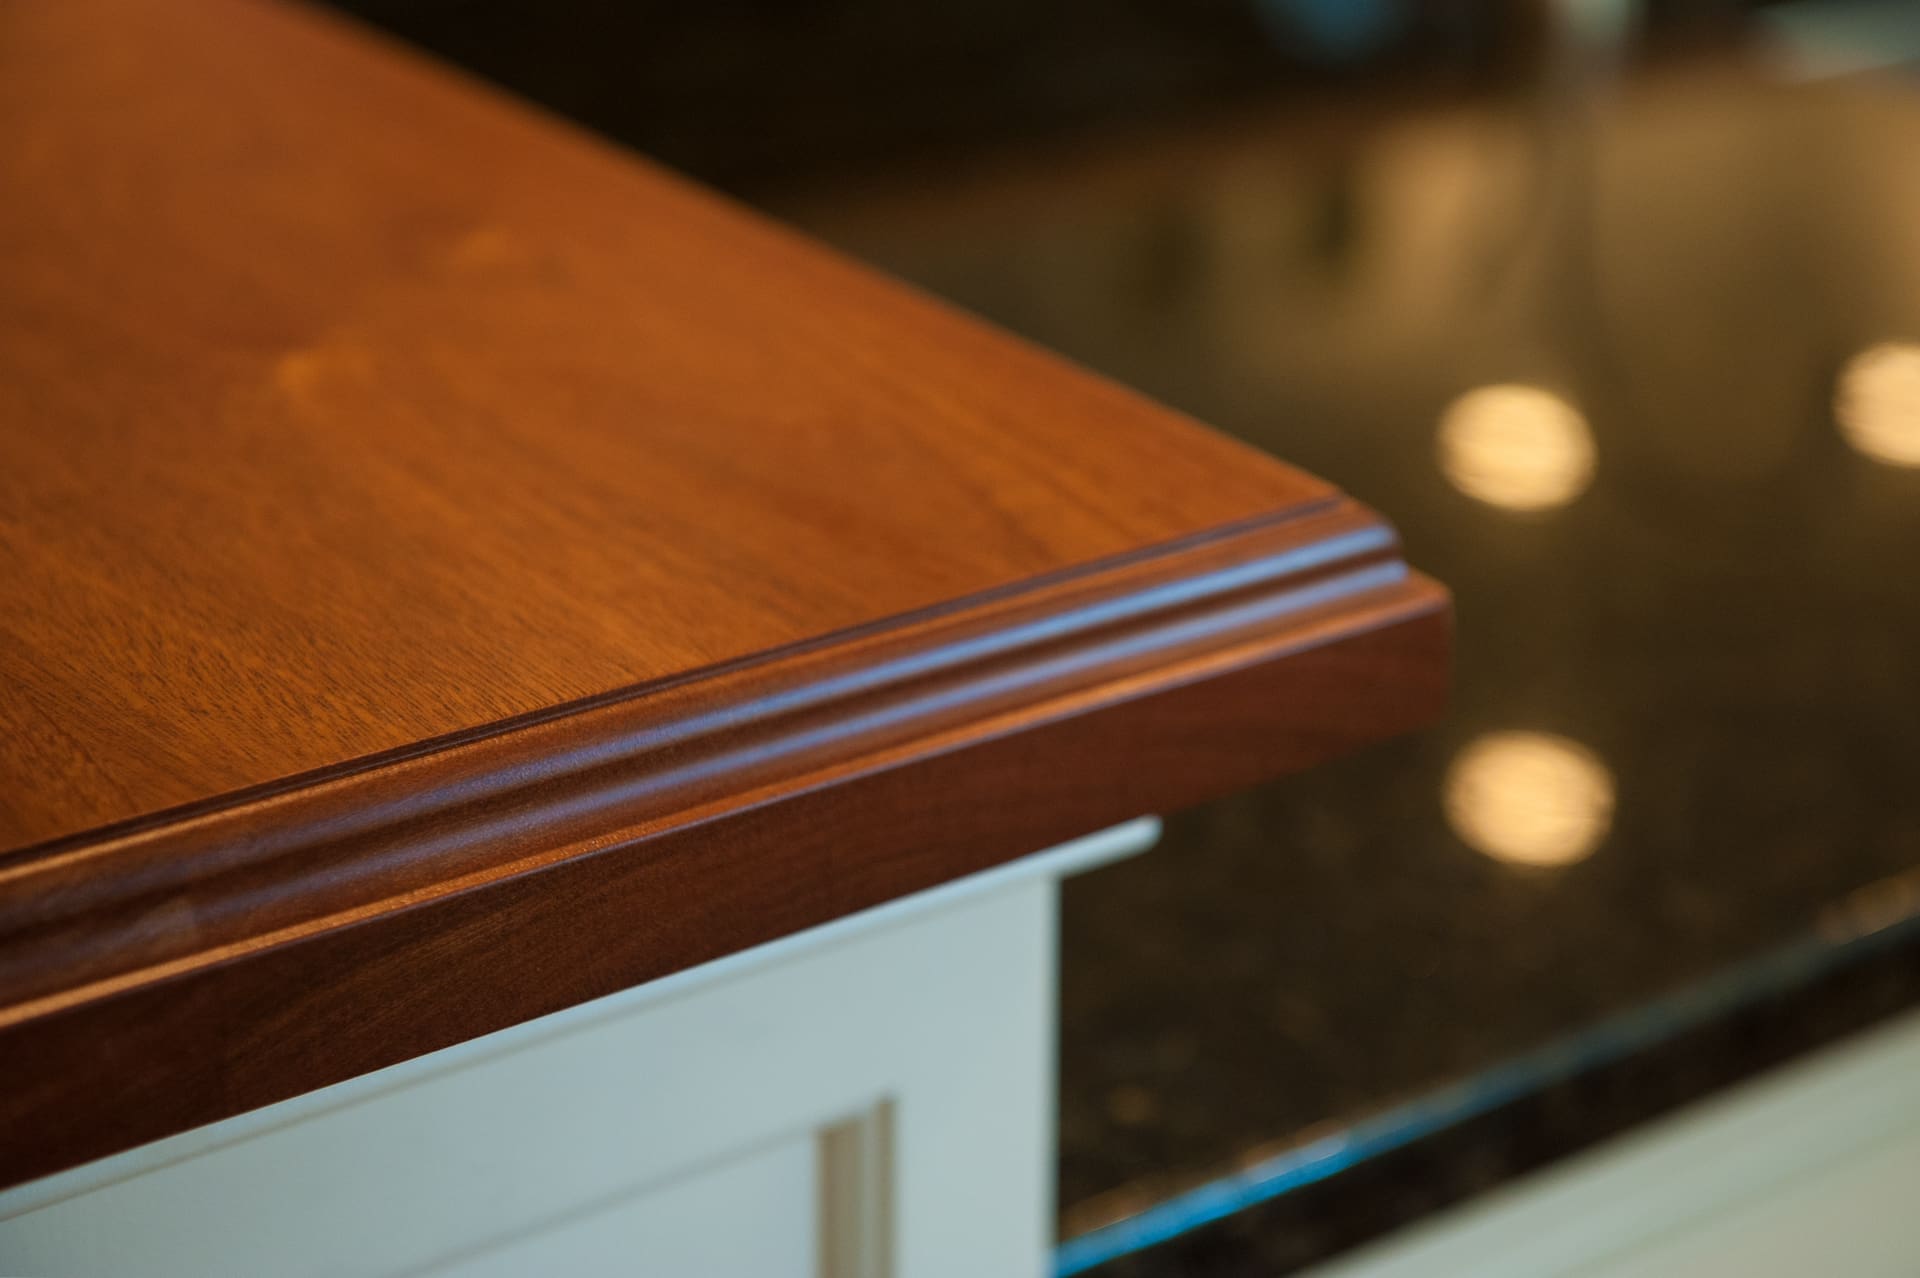 A photo of a wooden countertop with a decorative beveled edge.